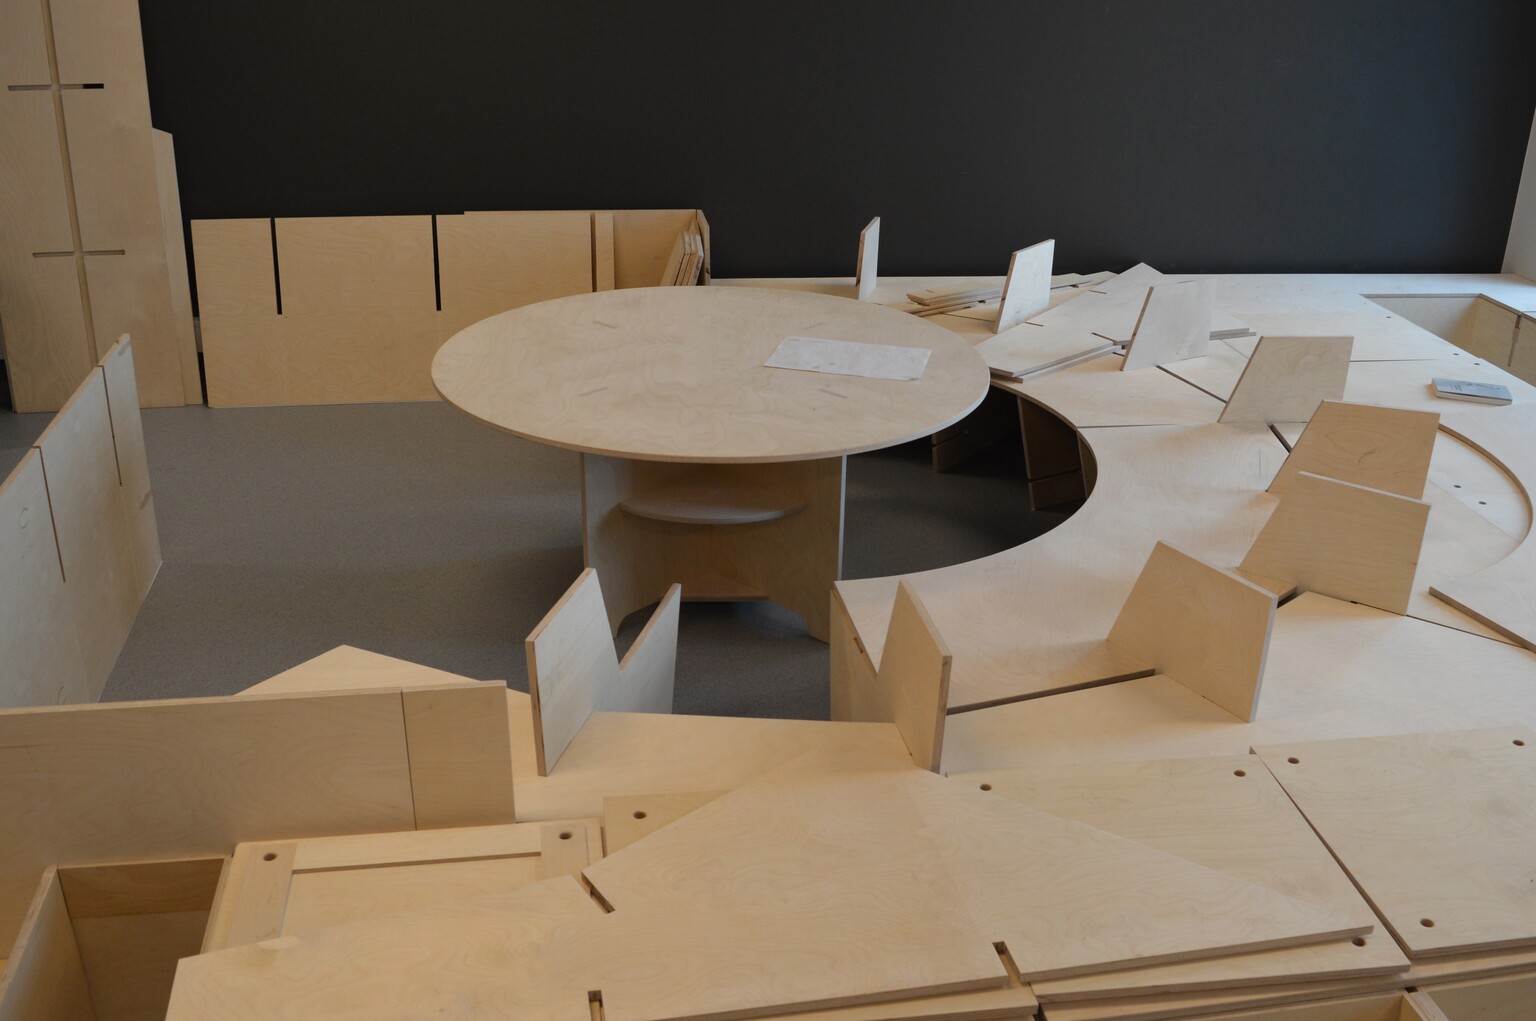 “Flytende møbel (Horigotatsu)” is a collaboration between architect Alexander Eriksson Furunes and the Agder Kunstakademi students, to reshape the classroom inside Agder Prison